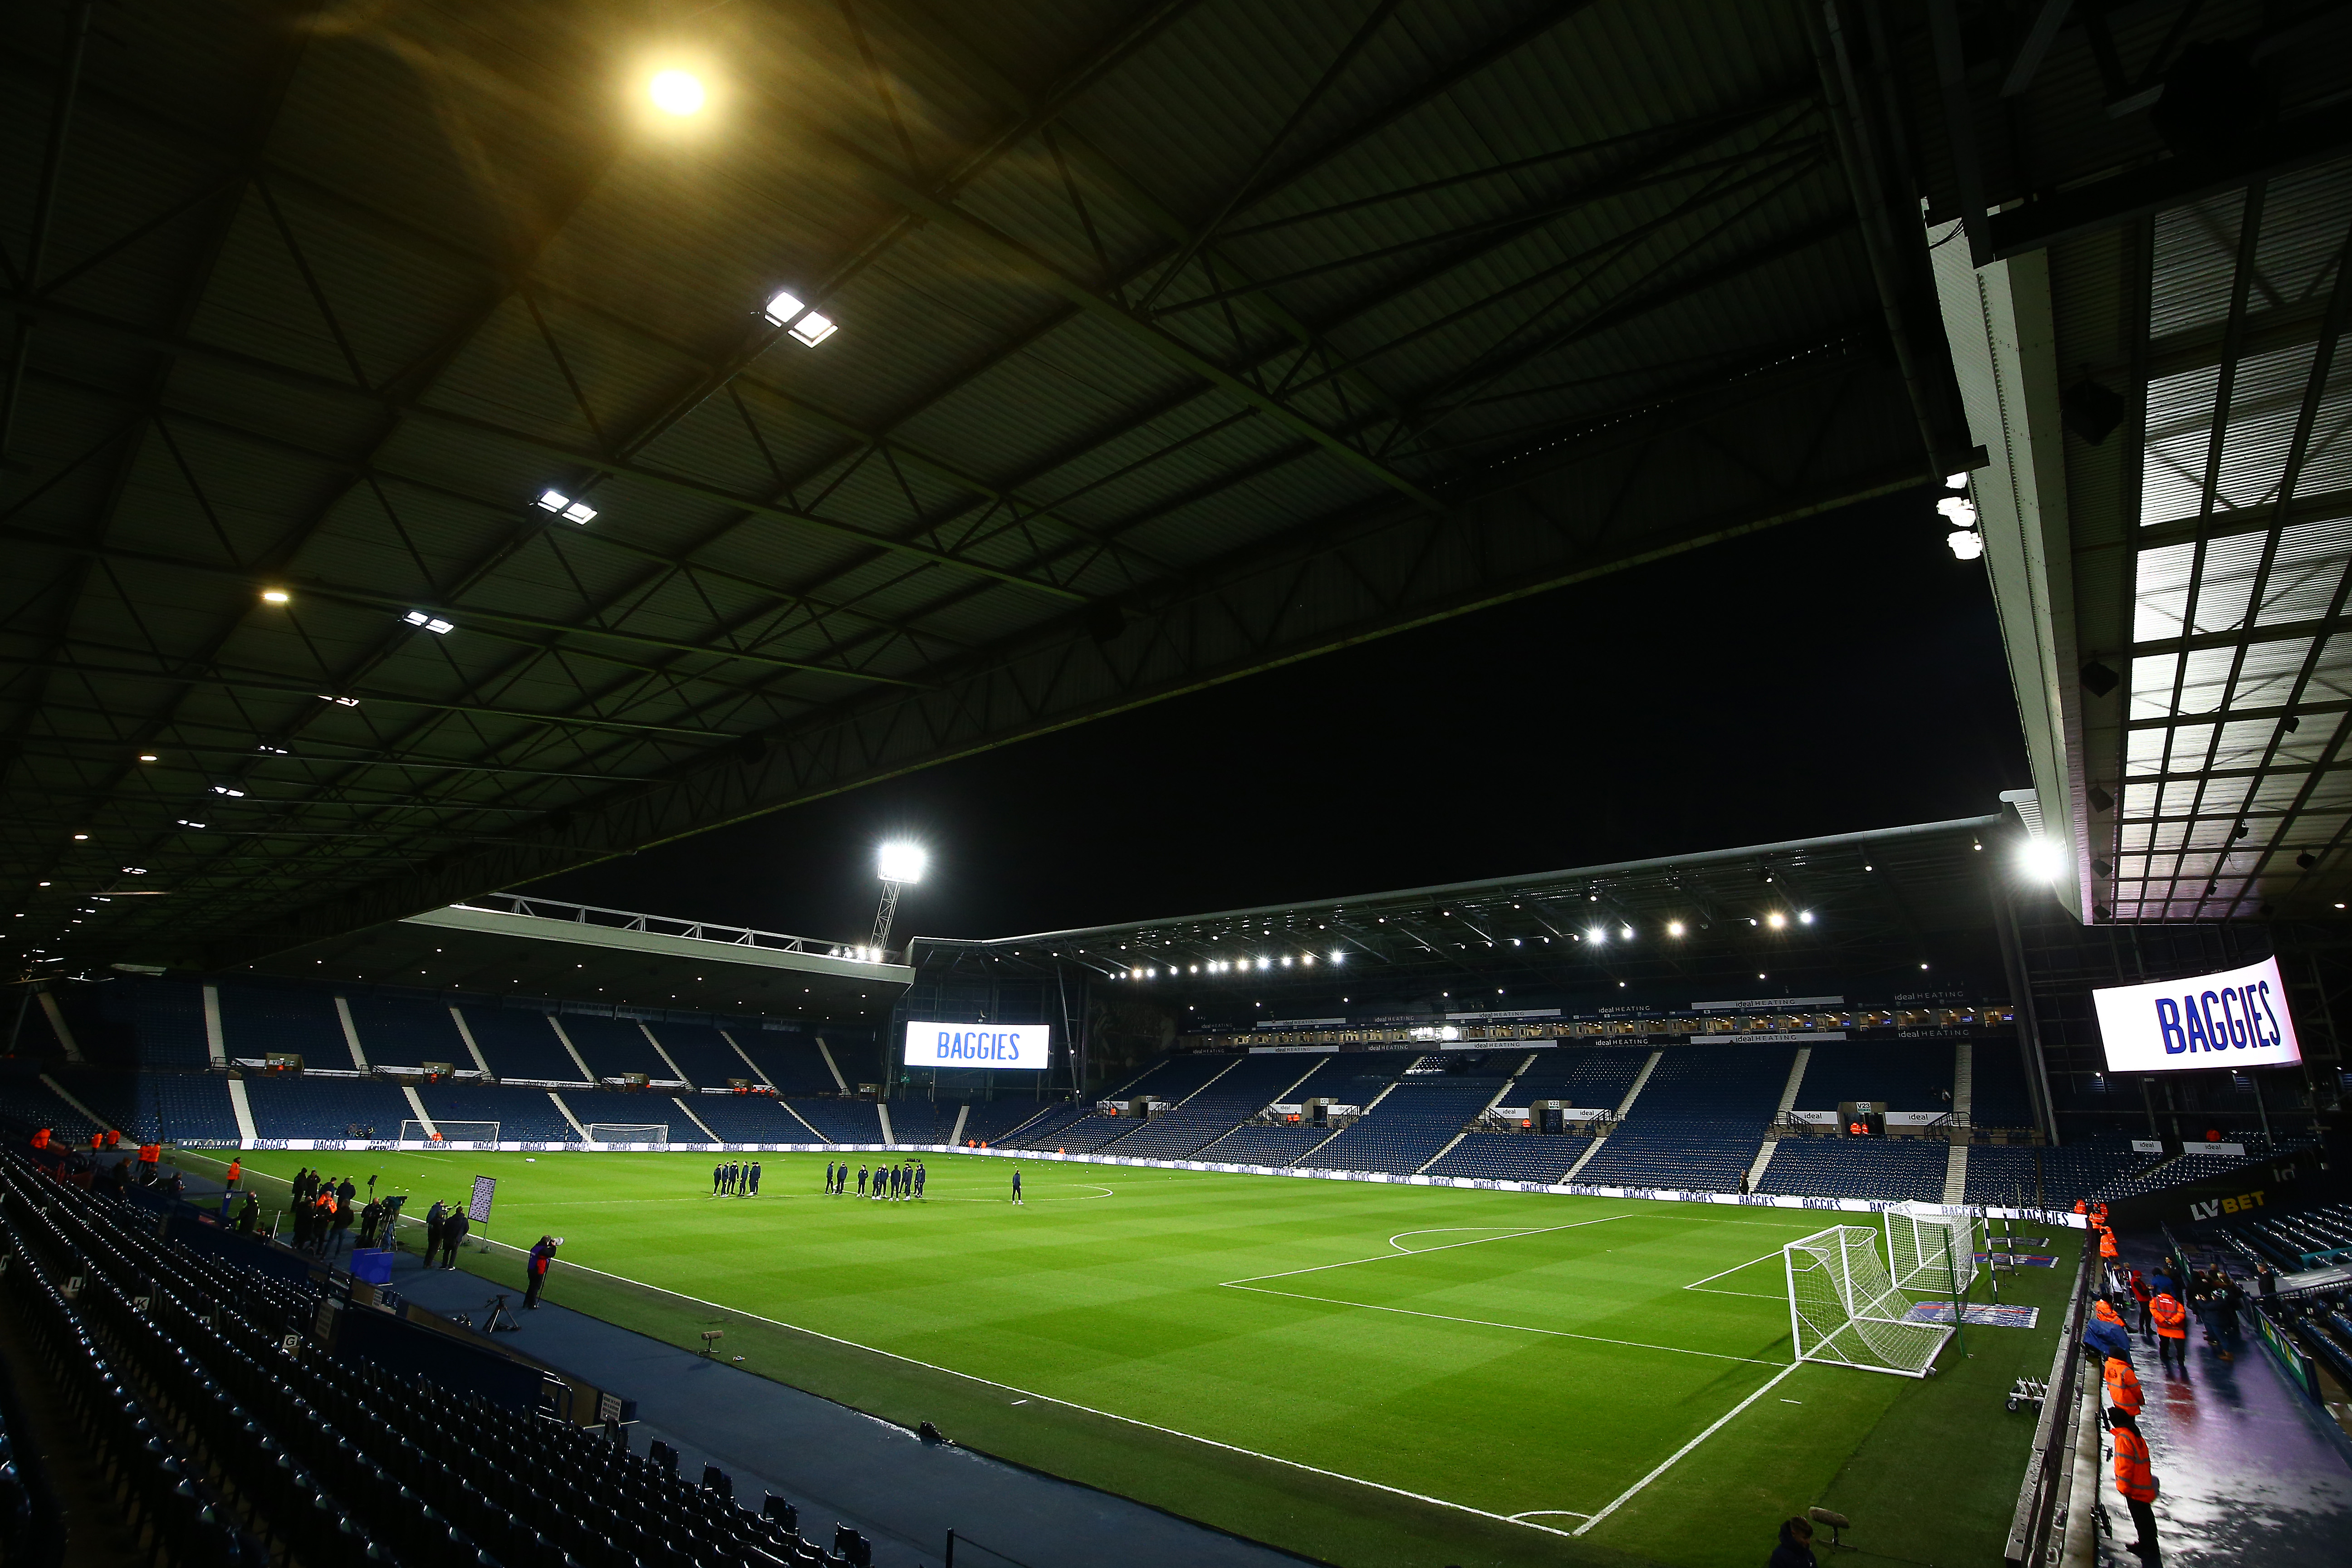 A shot of The Hawthorns pitch.